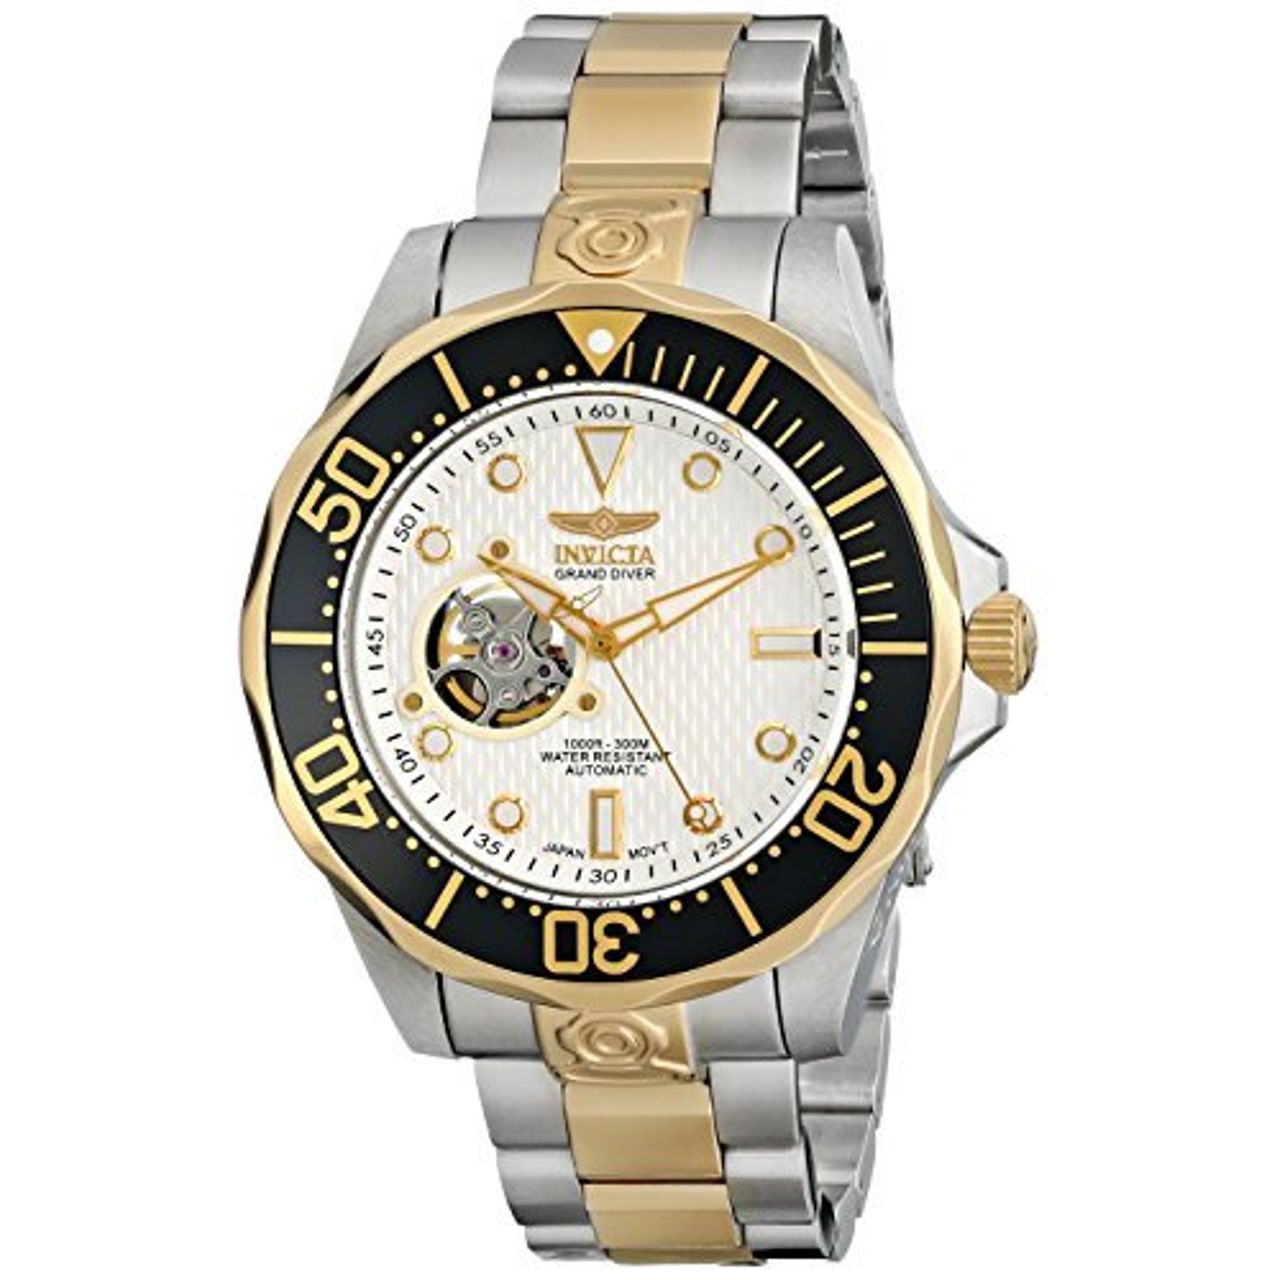 Invicta 13704 Mens White Dial Automatic Watch with Stainless Steel Strap